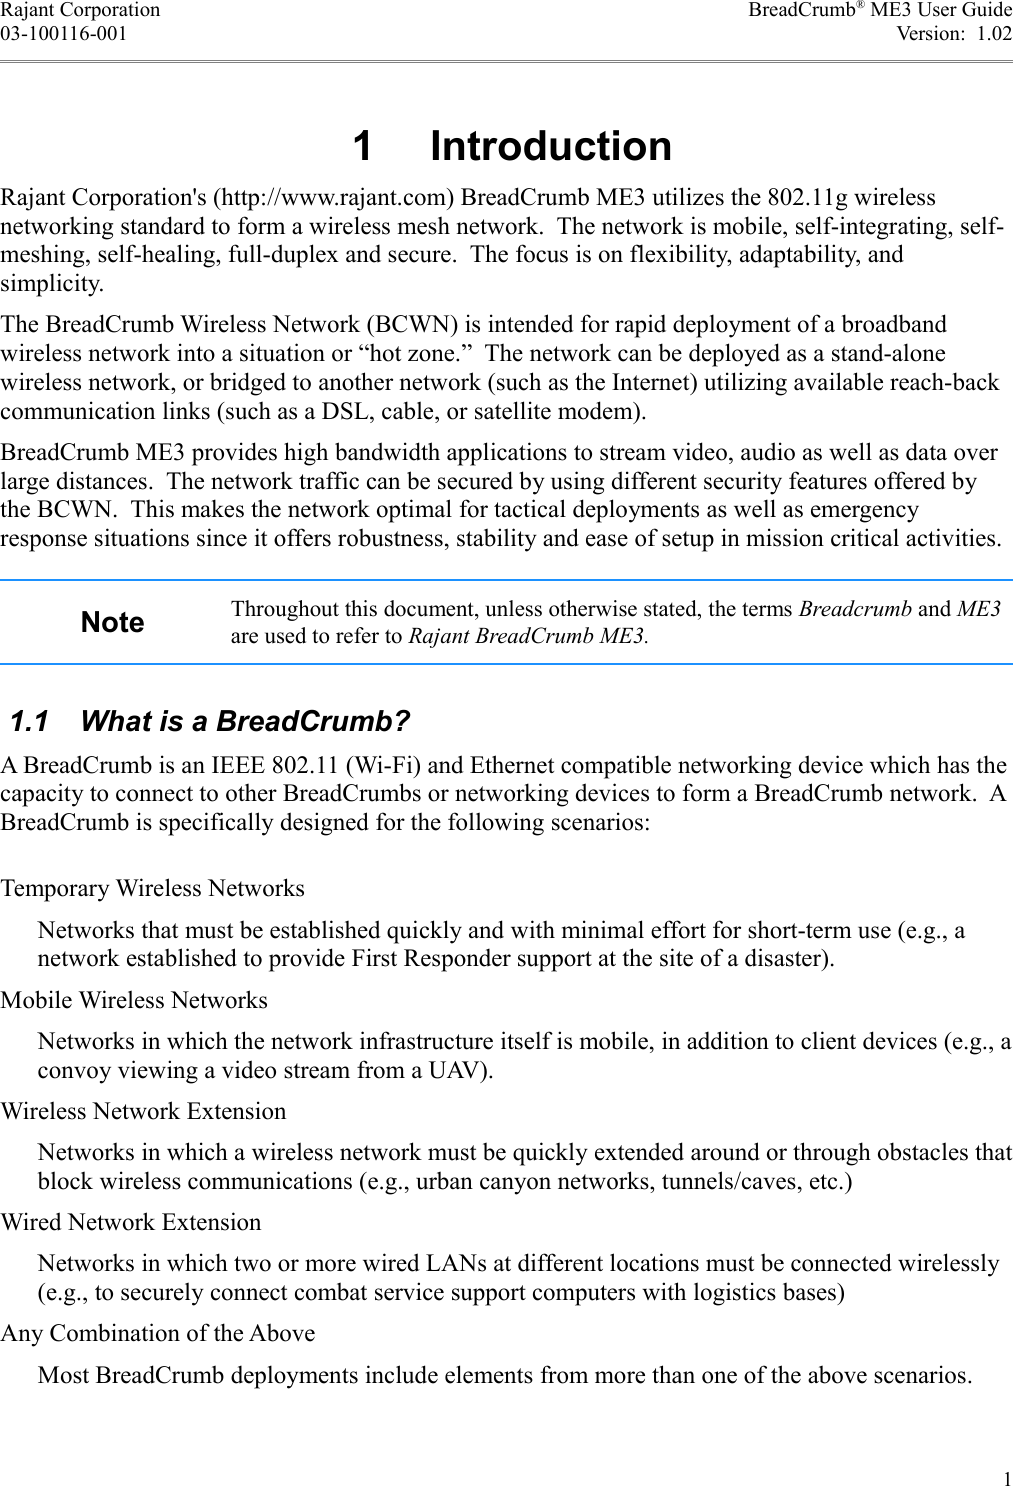 Rajant Corporation BreadCrumb® ME3 User Guide03-100116-001 Version:  1.02 1  IntroductionRajant Corporation&apos;s (http://www.rajant.com) BreadCrumb ME3 utilizes the 802.11g wireless networking standard to form a wireless mesh network.  The network is mobile, self-integrating, self-meshing, self-healing, full-duplex and secure.  The focus is on flexibility, adaptability, and simplicity.The BreadCrumb Wireless Network (BCWN) is intended for rapid deployment of a broadband wireless network into a situation or “hot zone.”  The network can be deployed as a stand-alone wireless network, or bridged to another network (such as the Internet) utilizing available reach-back communication links (such as a DSL, cable, or satellite modem).BreadCrumb ME3 provides high bandwidth applications to stream video, audio as well as data over large distances.  The network traffic can be secured by using different security features offered by the BCWN.  This makes the network optimal for tactical deployments as well as emergency response situations since it offers robustness, stability and ease of setup in mission critical activities. Note Throughout this document, unless otherwise stated, the terms Breadcrumb and ME3 are used to refer to Rajant BreadCrumb ME3. 1.1  What is a BreadCrumb?A BreadCrumb is an IEEE 802.11 (Wi-Fi) and Ethernet compatible networking device which has the capacity to connect to other BreadCrumbs or networking devices to form a BreadCrumb network.  A BreadCrumb is specifically designed for the following scenarios:Temporary Wireless NetworksNetworks that must be established quickly and with minimal effort for short-term use (e.g., a network established to provide First Responder support at the site of a disaster).Mobile Wireless NetworksNetworks in which the network infrastructure itself is mobile, in addition to client devices (e.g., a convoy viewing a video stream from a UAV).Wireless Network ExtensionNetworks in which a wireless network must be quickly extended around or through obstacles that block wireless communications (e.g., urban canyon networks, tunnels/caves, etc.)Wired Network ExtensionNetworks in which two or more wired LANs at different locations must be connected wirelessly (e.g., to securely connect combat service support computers with logistics bases)Any Combination of the AboveMost BreadCrumb deployments include elements from more than one of the above scenarios.1